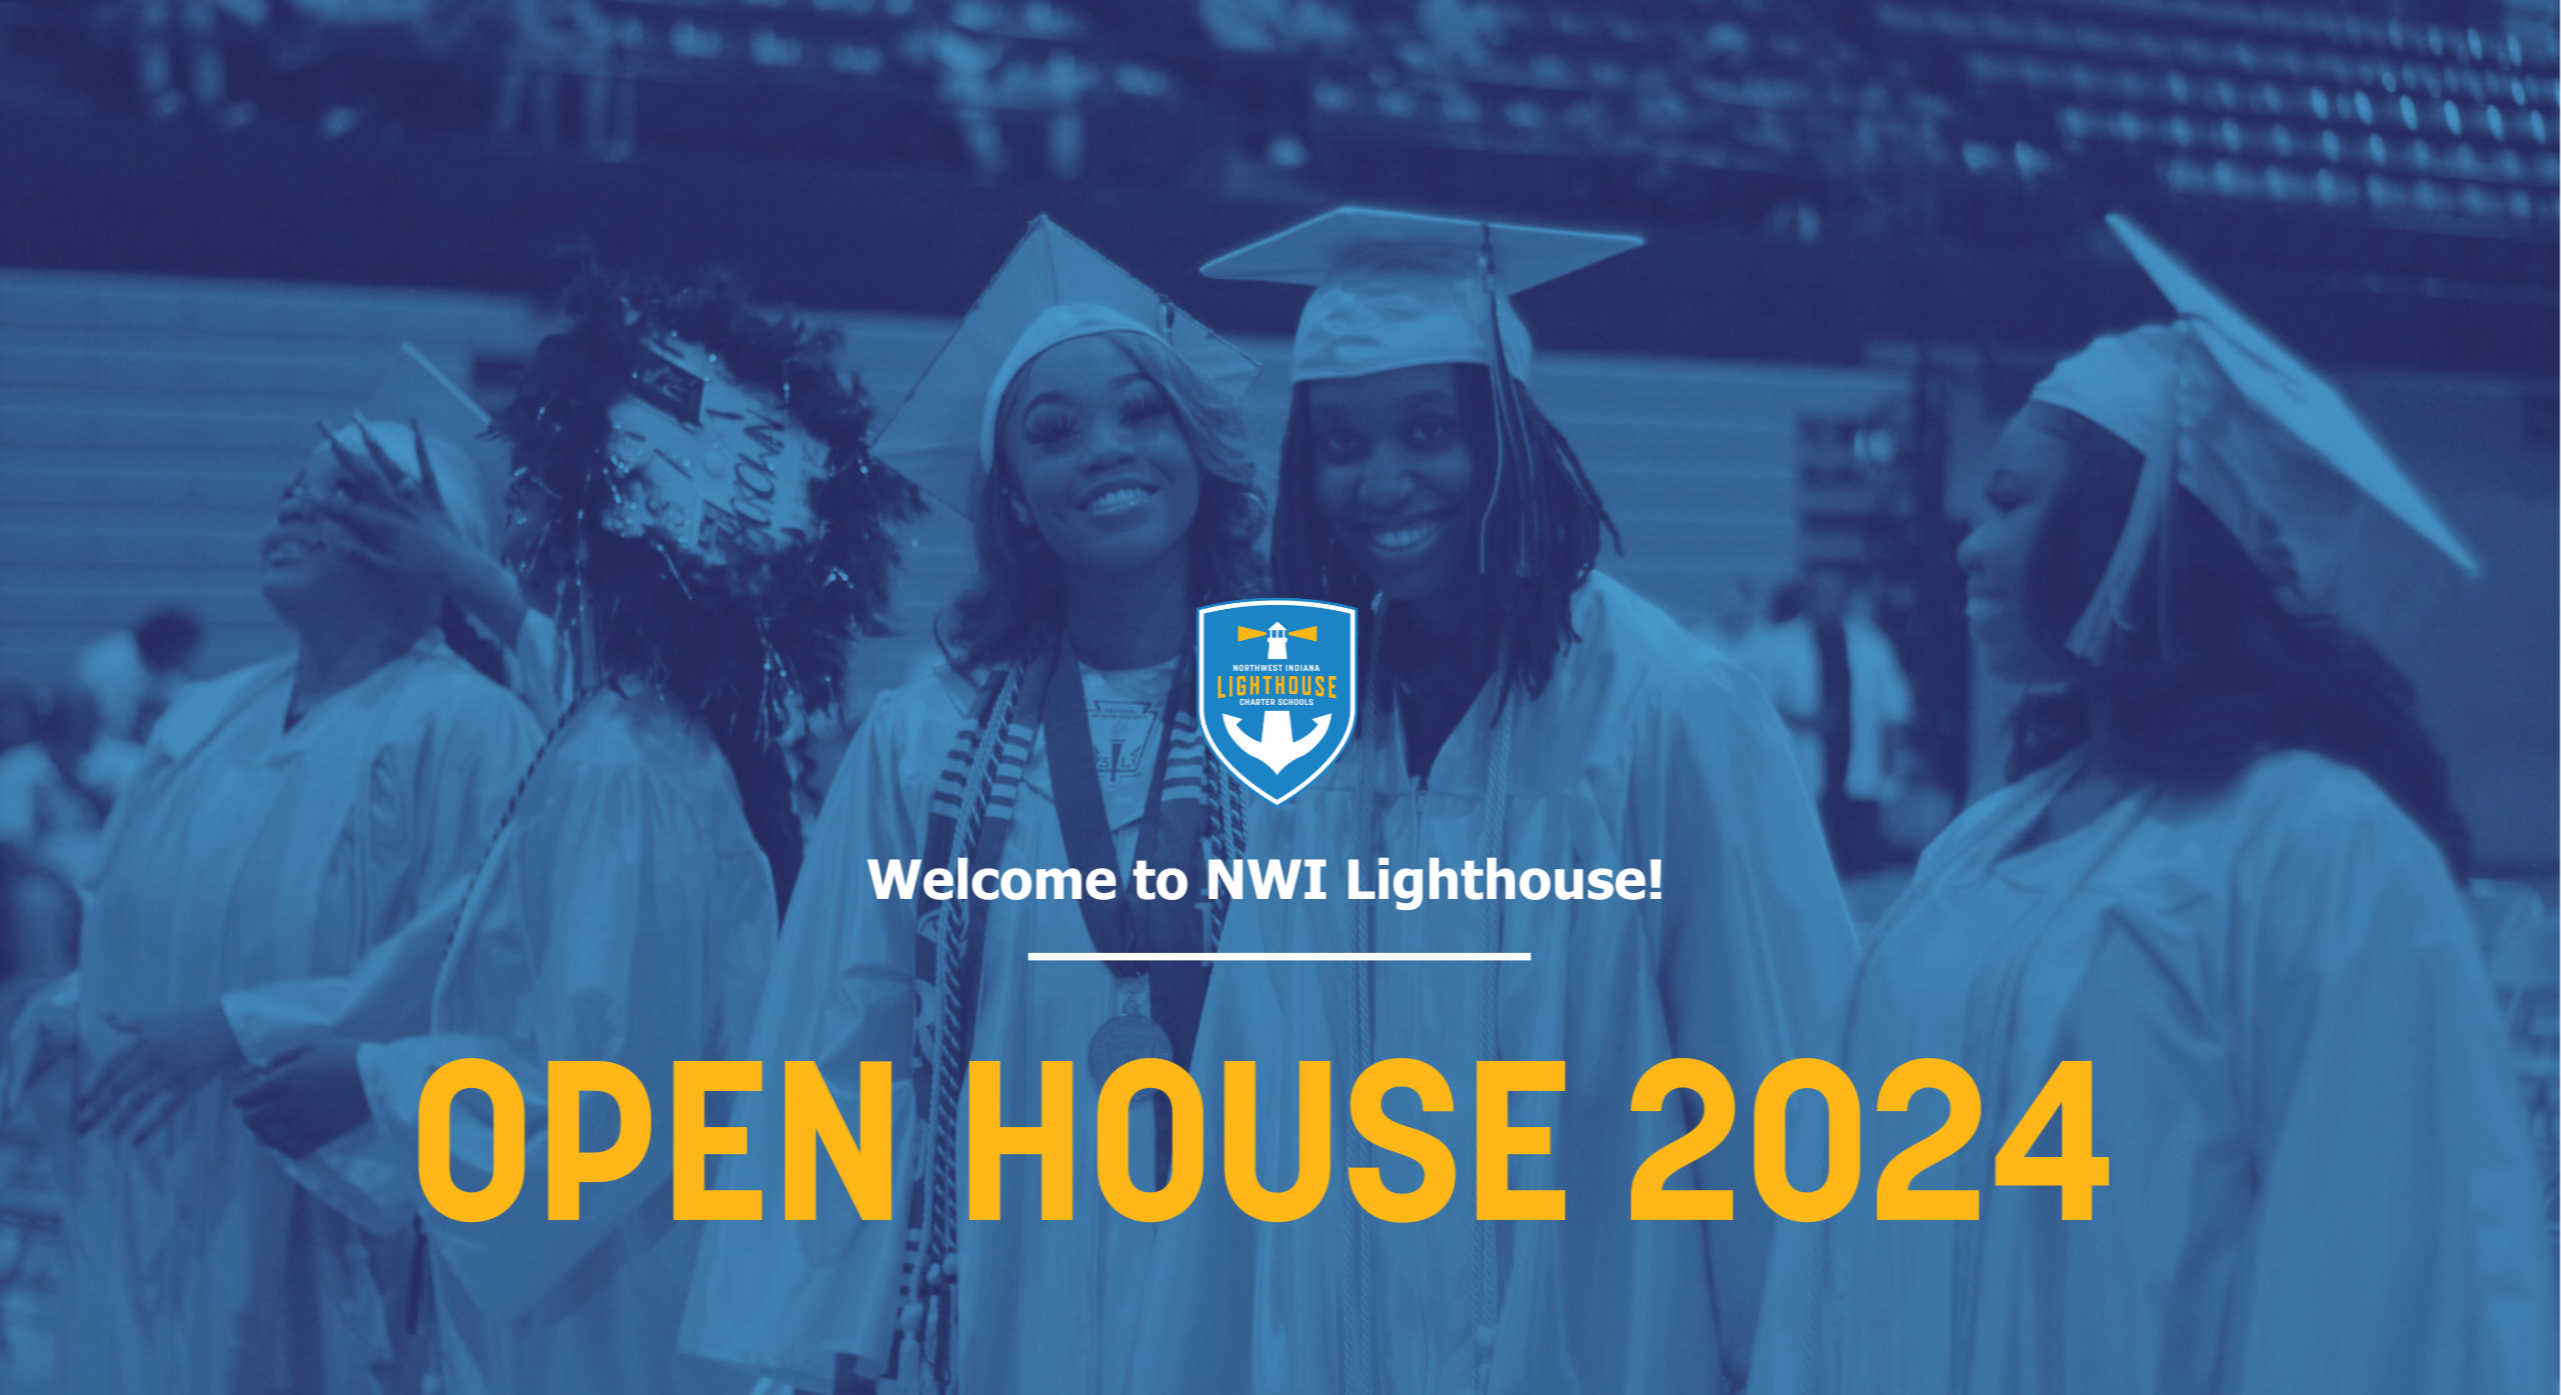 Welcome to Open House 2024